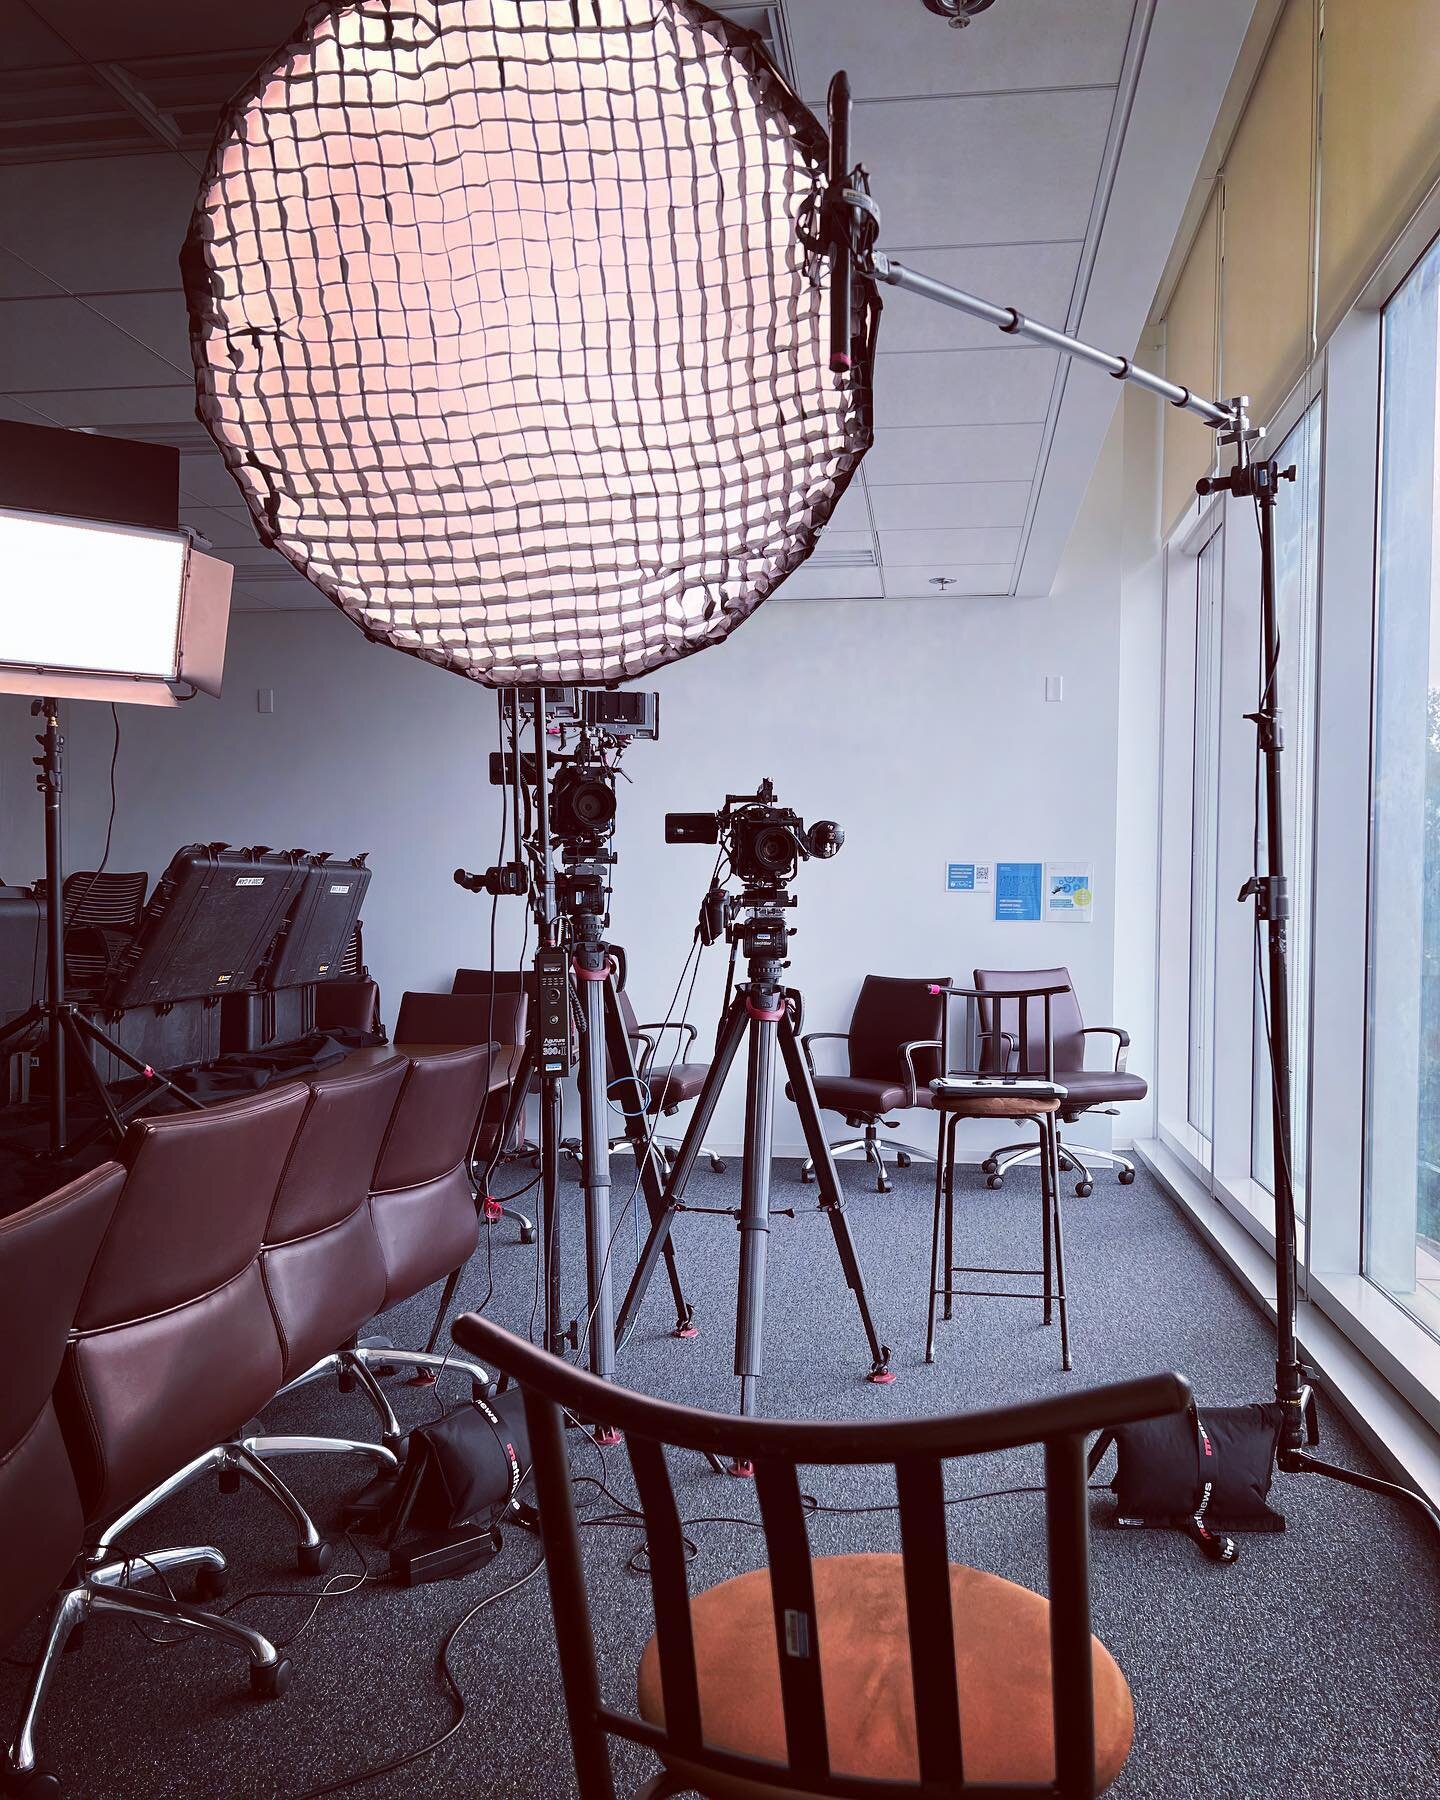 Our setup for today&rsquo;s shoot with our fantastic client, primela_bruins 

 #videoproductioncompany #videoproduction #videoshoot #marketingvideo #marketing #videoproductionla #corporatevideographer #corporatevideo #healthcare #contentprovider #int